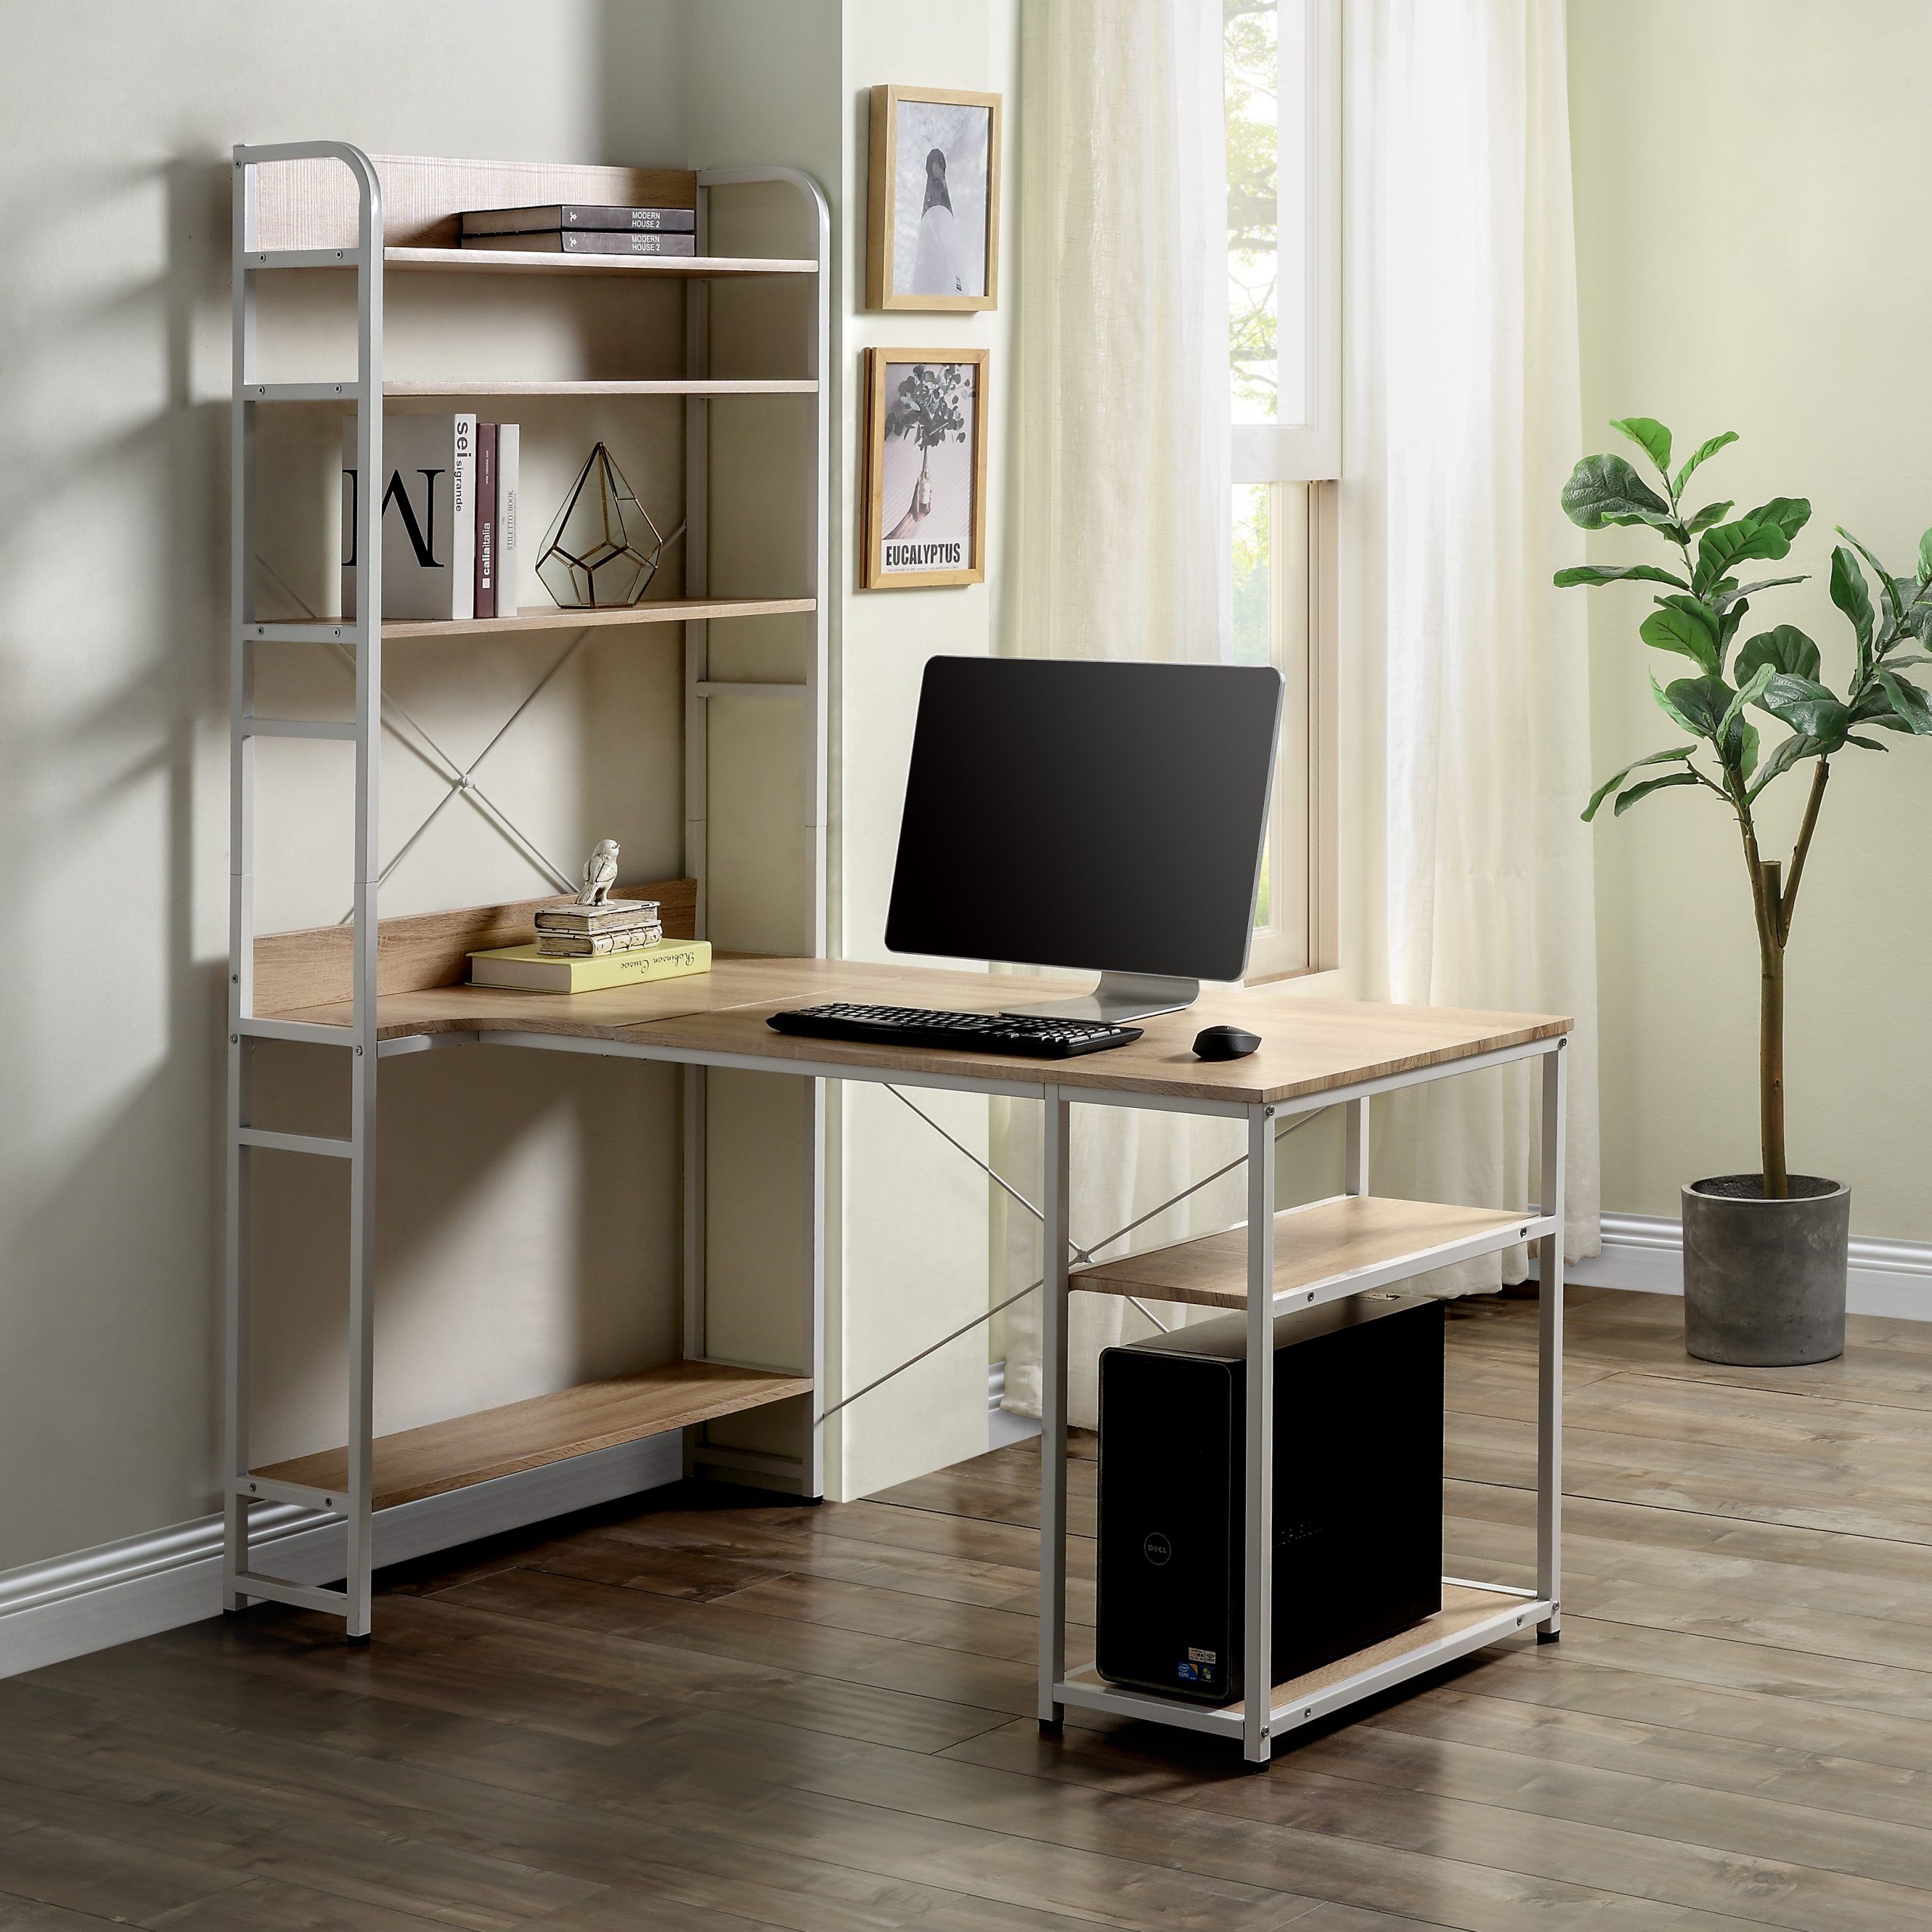 Yofe Home Office Desk With Storage, Modern Computer Desk W/ 5 Tier Throughout Executive Desks With Dual Storage (View 4 of 15)